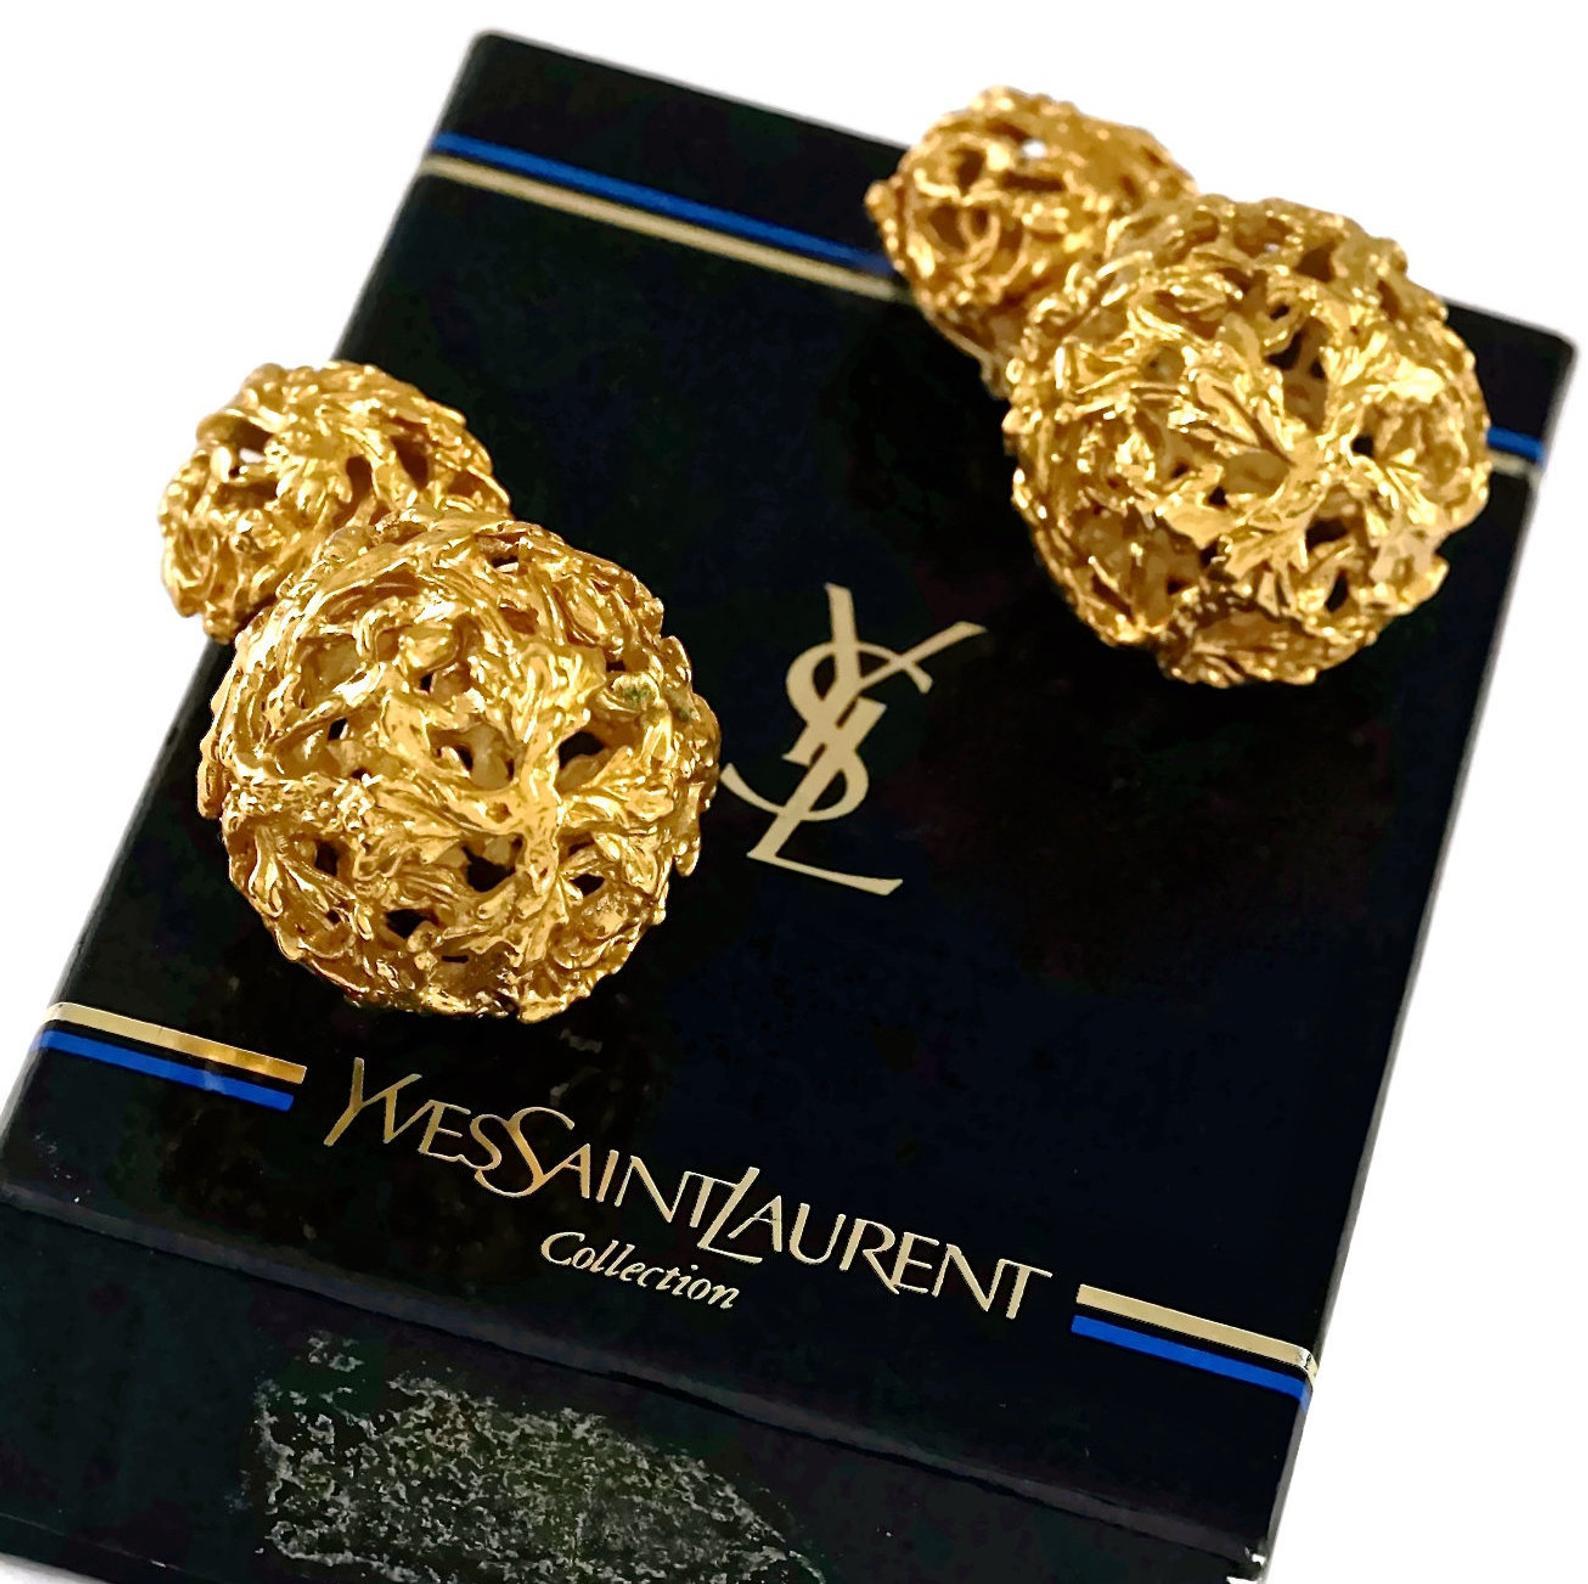 Vintage YVES SAINT LAURENT Ysl Textured Coiled Ball Dangling Earrings

Measurements:
Height: 2.51 inches (6.4 cms)
Width: 1.33 inches (3.4 cms)
Weight per Earring: 36 grams

Features:
- 100% Authentic YVES SAINT LAURENT.
- Textured coiled ball